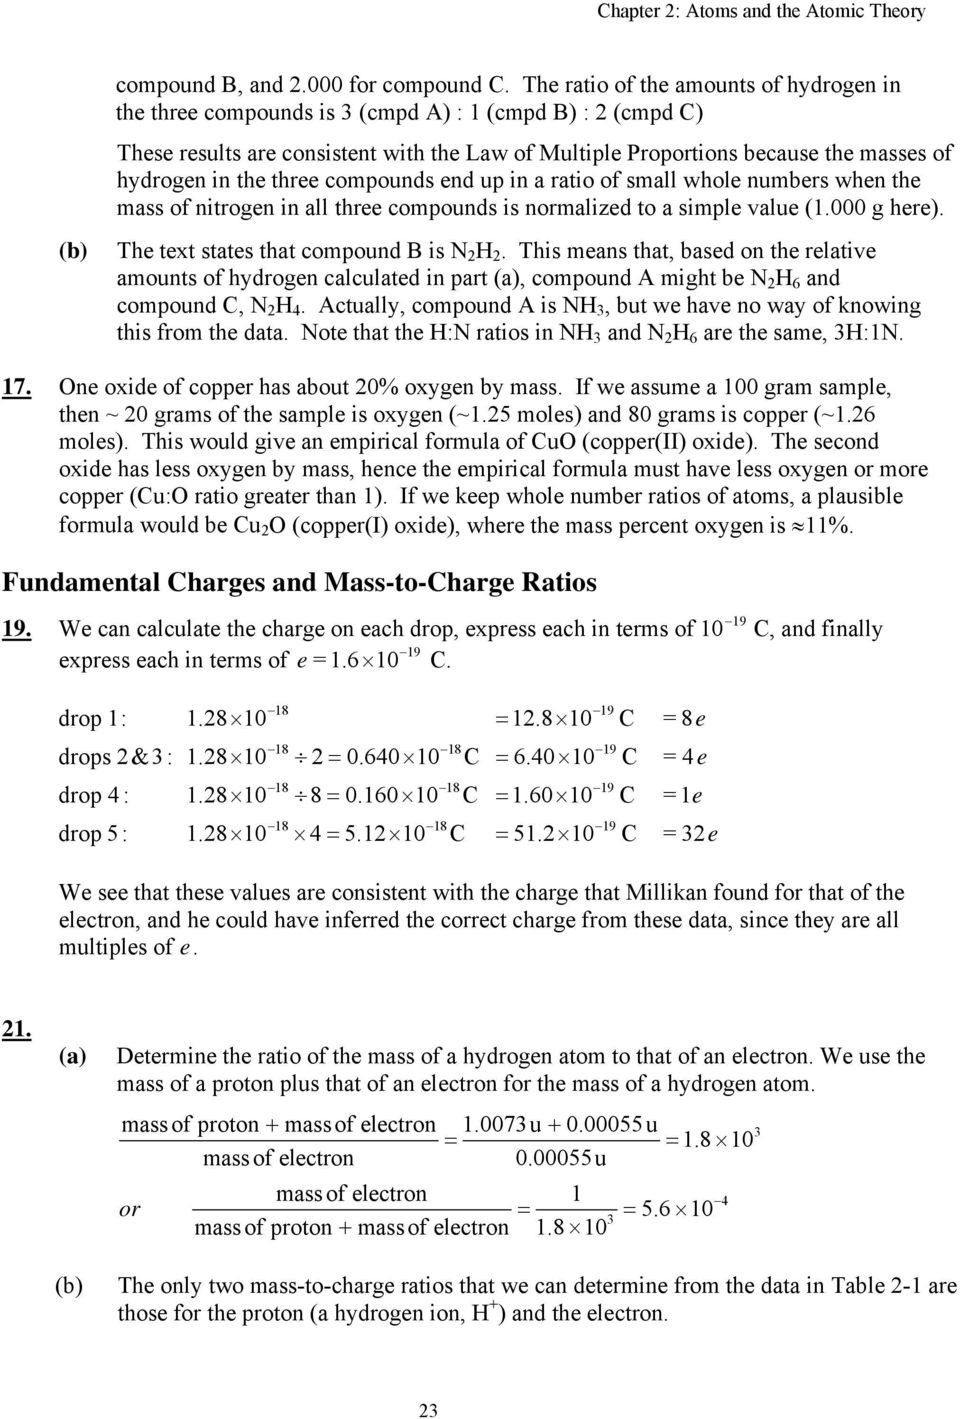 Atomic theory Worksheet Answers Chapter 2 atoms and the atomic theory Pdf Free Download